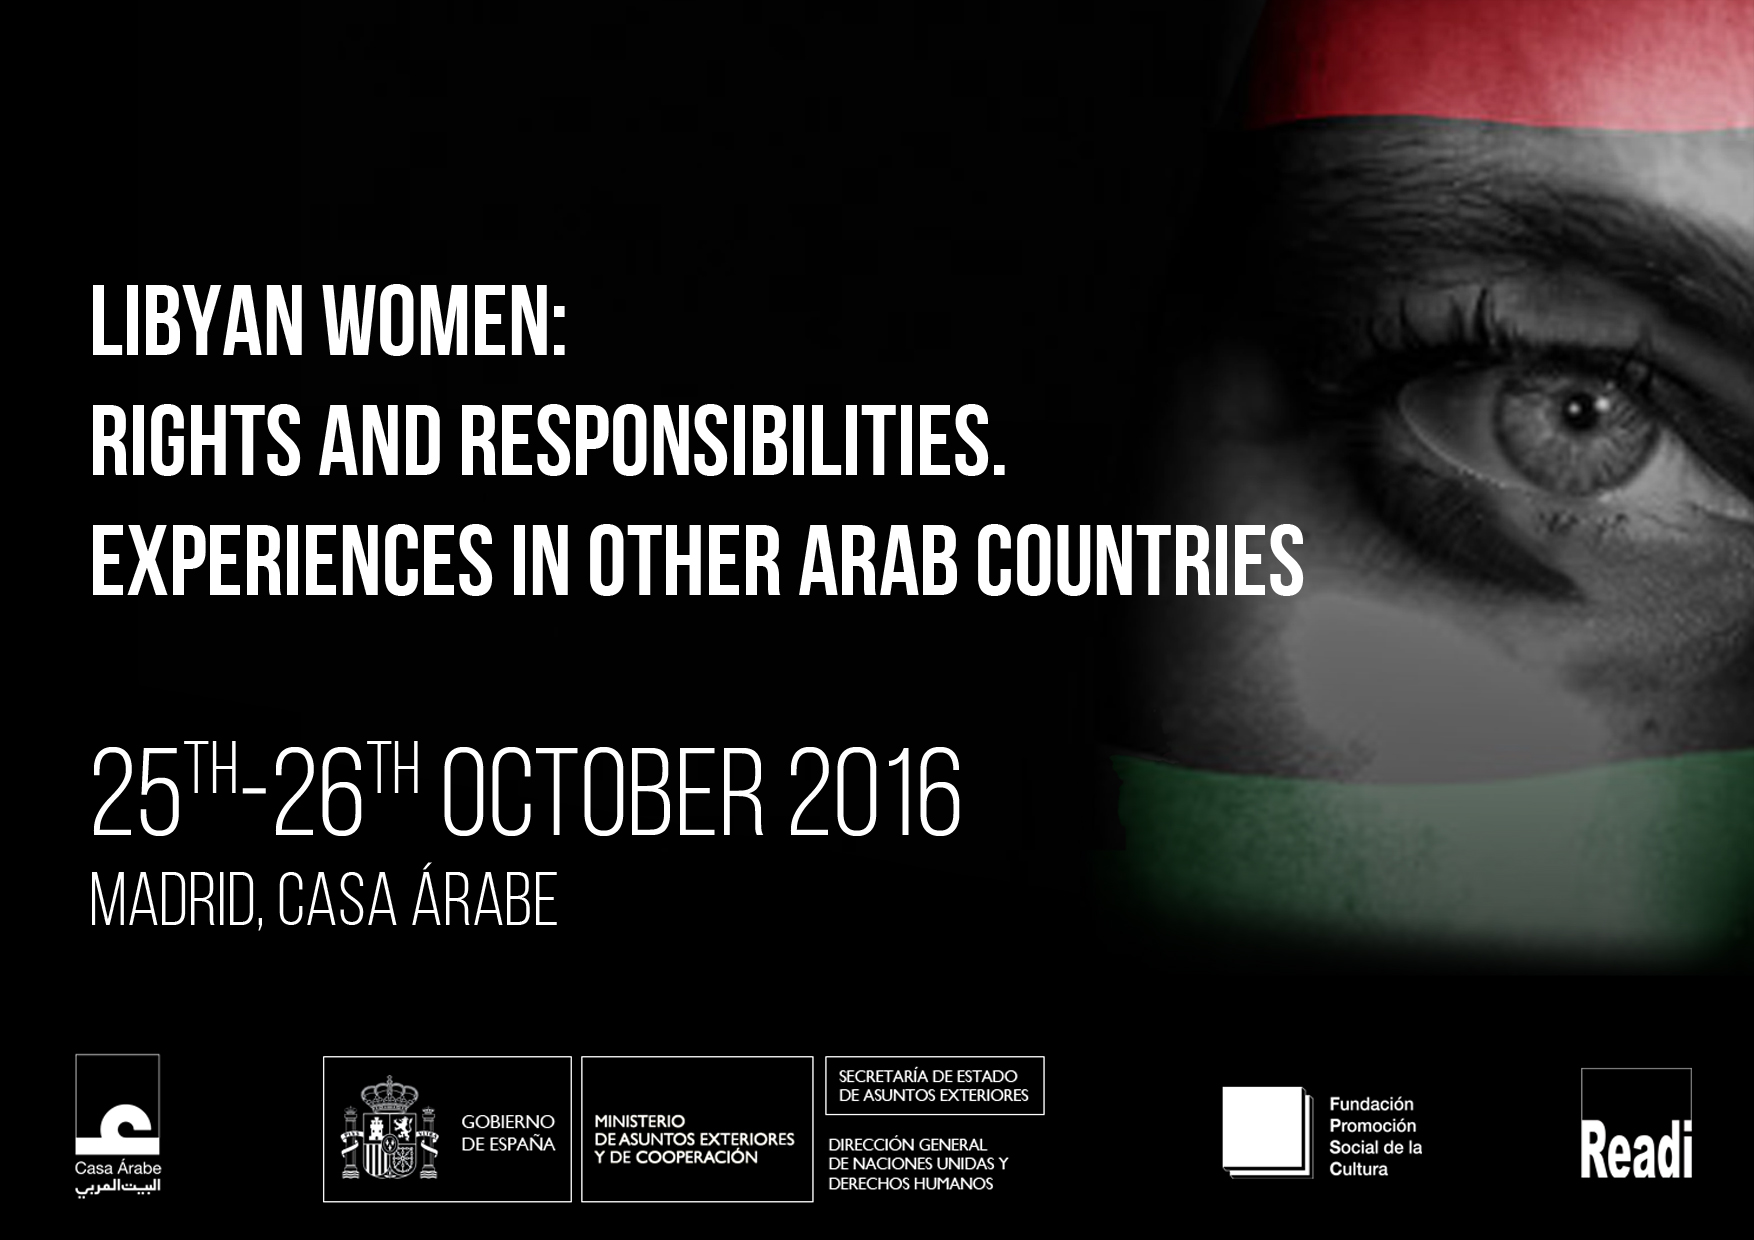 FPSC and READI present the results of the workshop celebrated in October devoted to the issue of Libyan Women